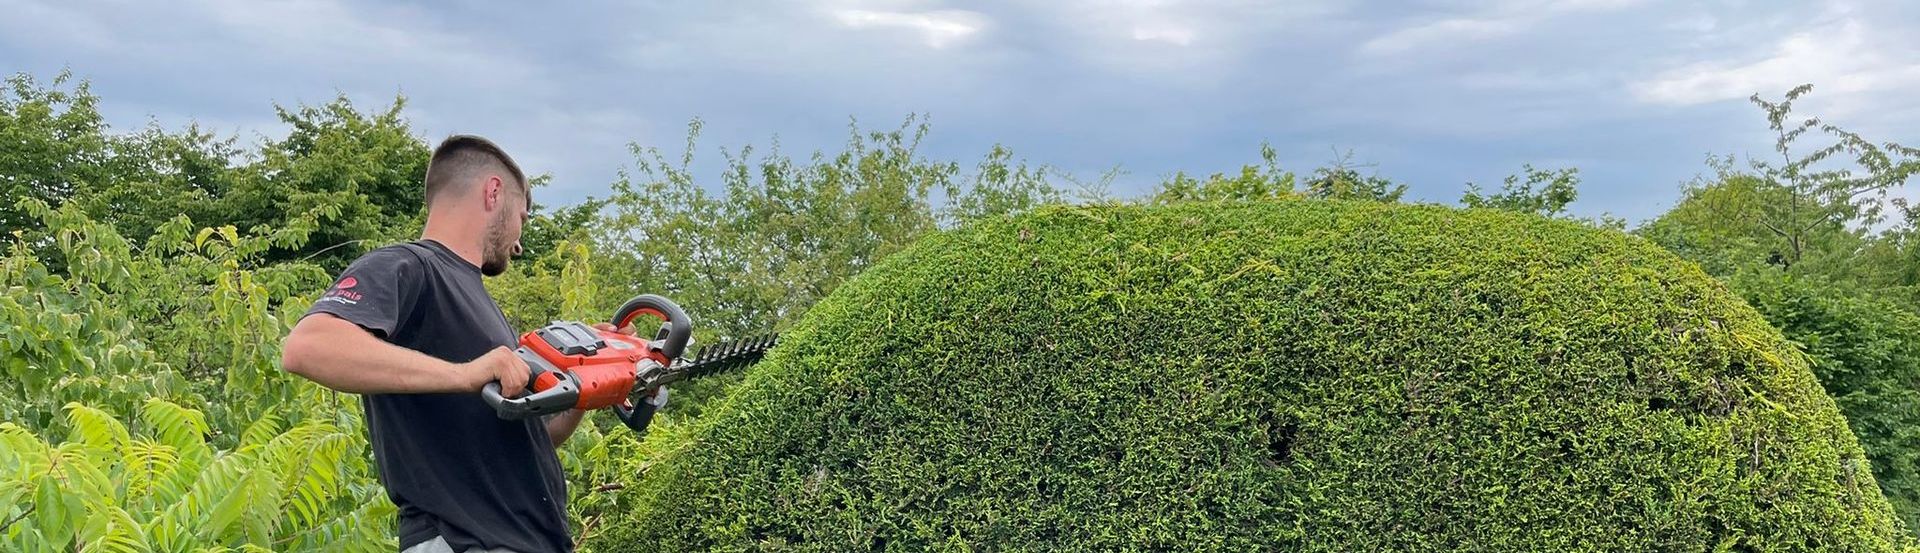 Hedge Shaping/Trimming